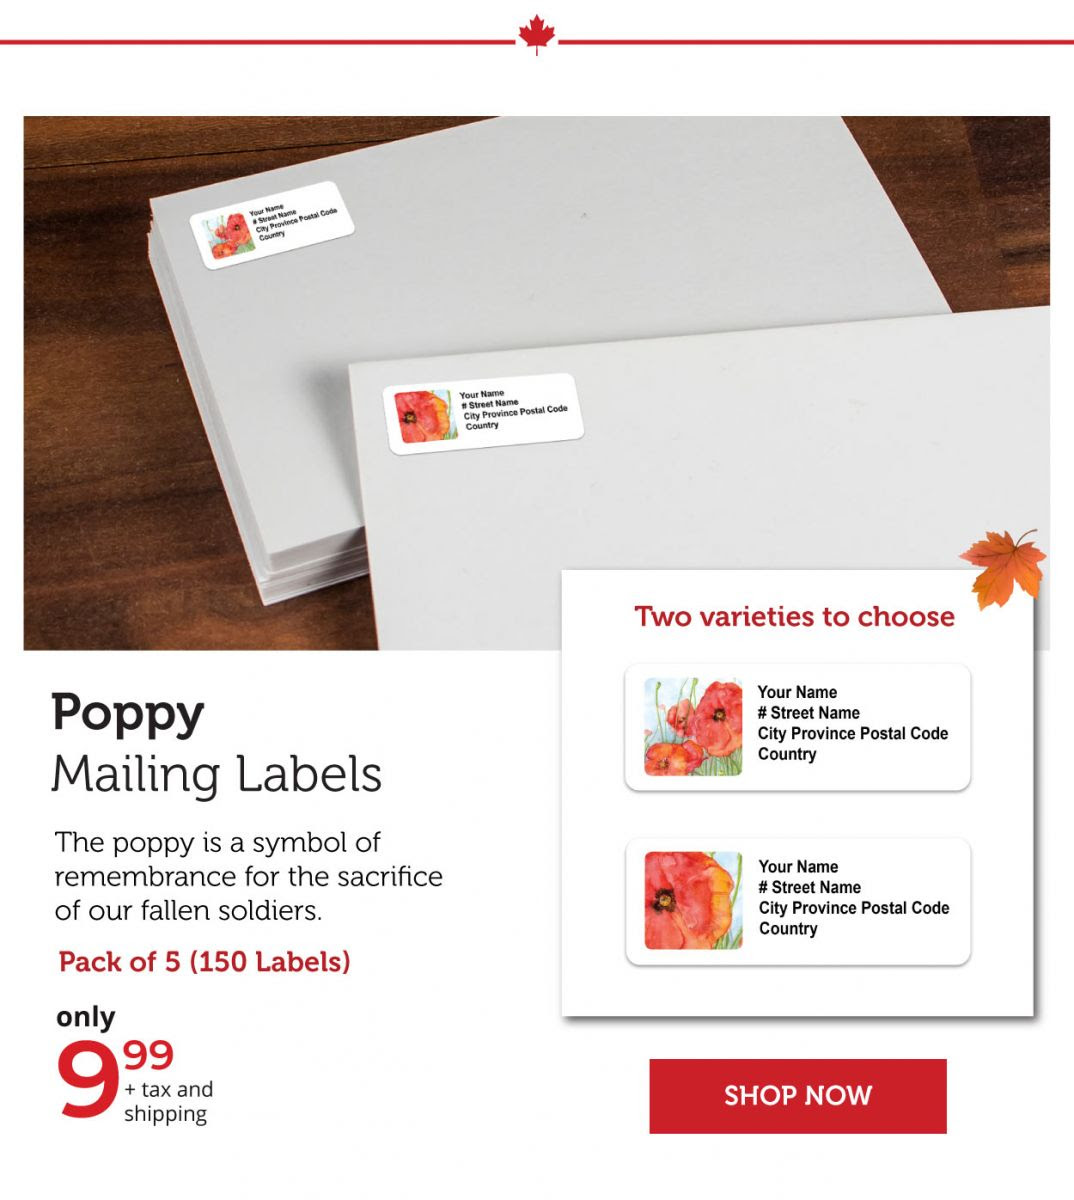 Poppy Mailing Labels